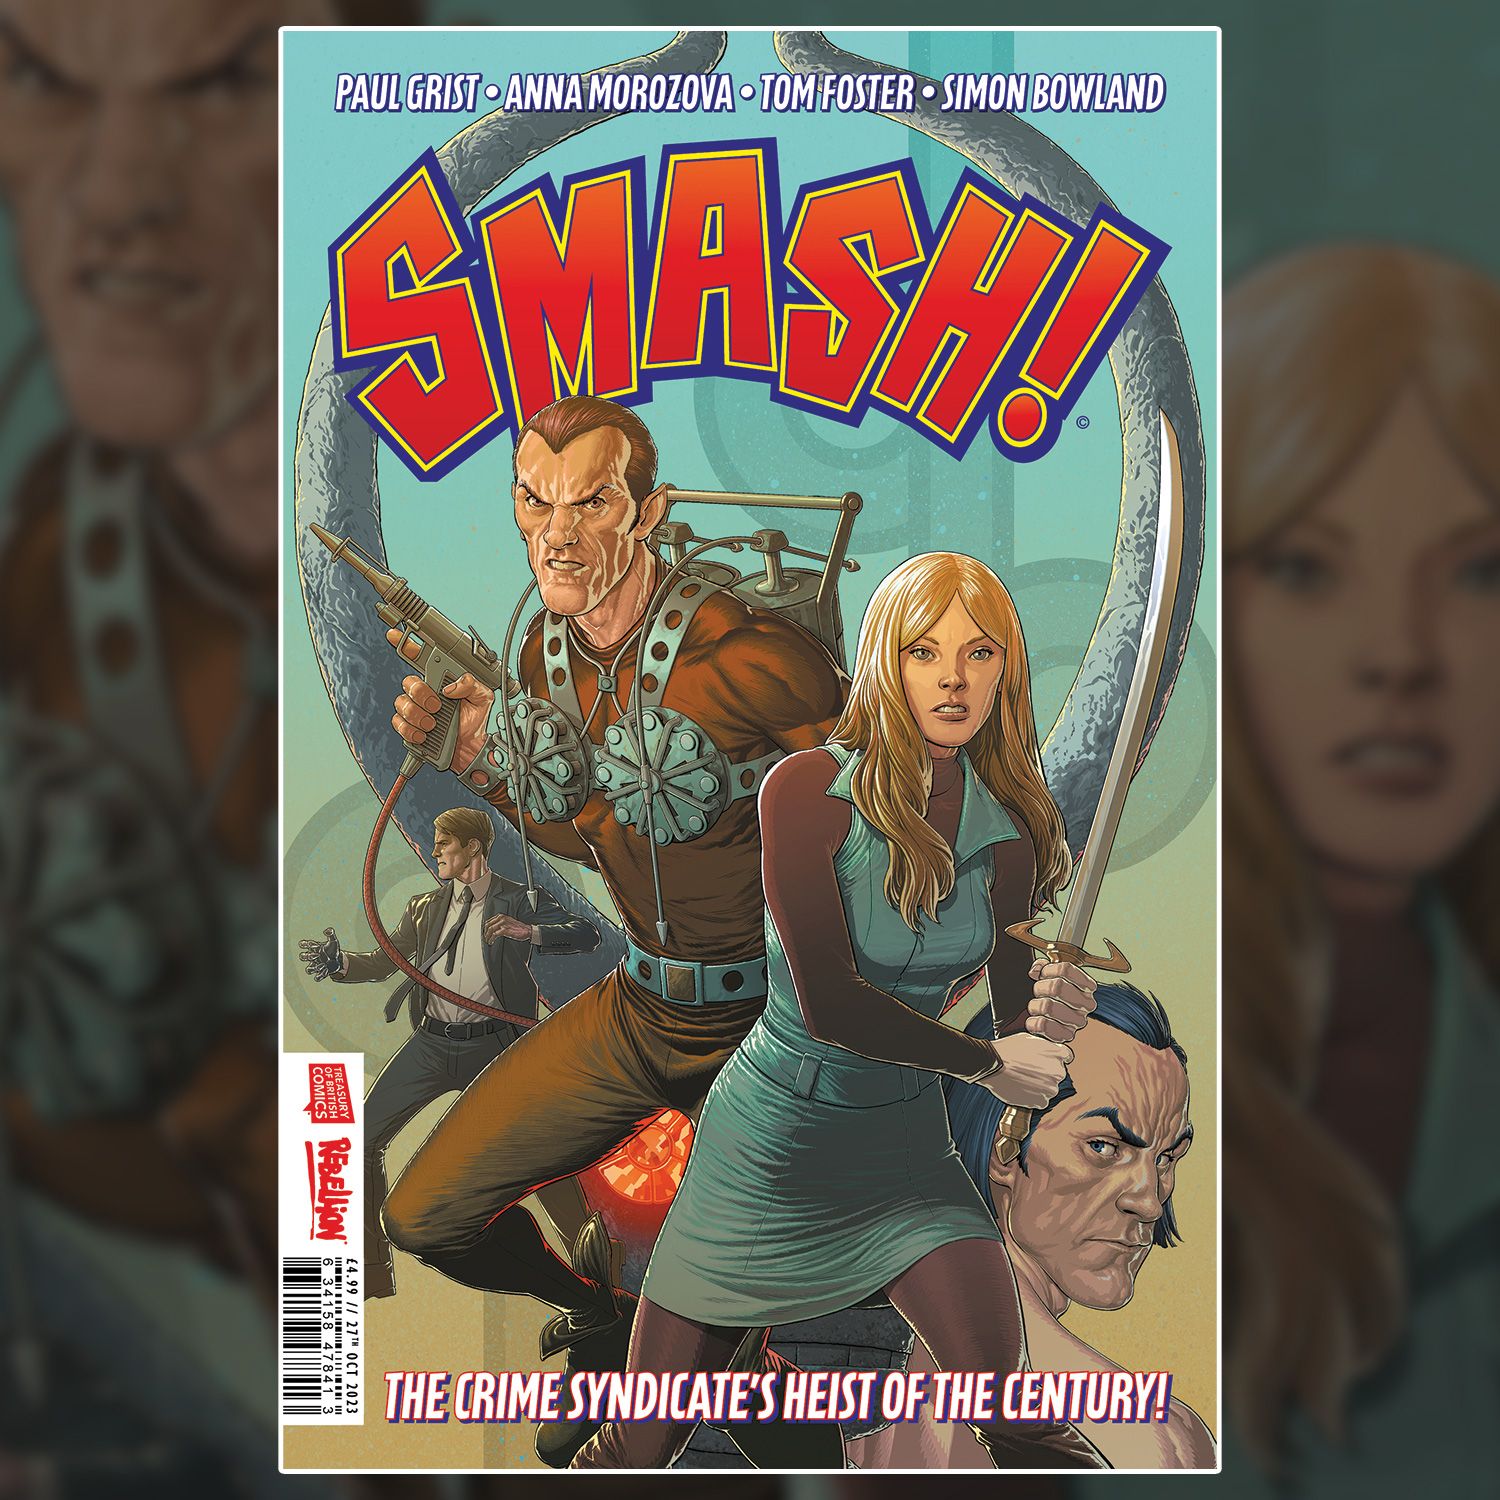 It’s the Heist of the Century! Pre-Order Smash! now!